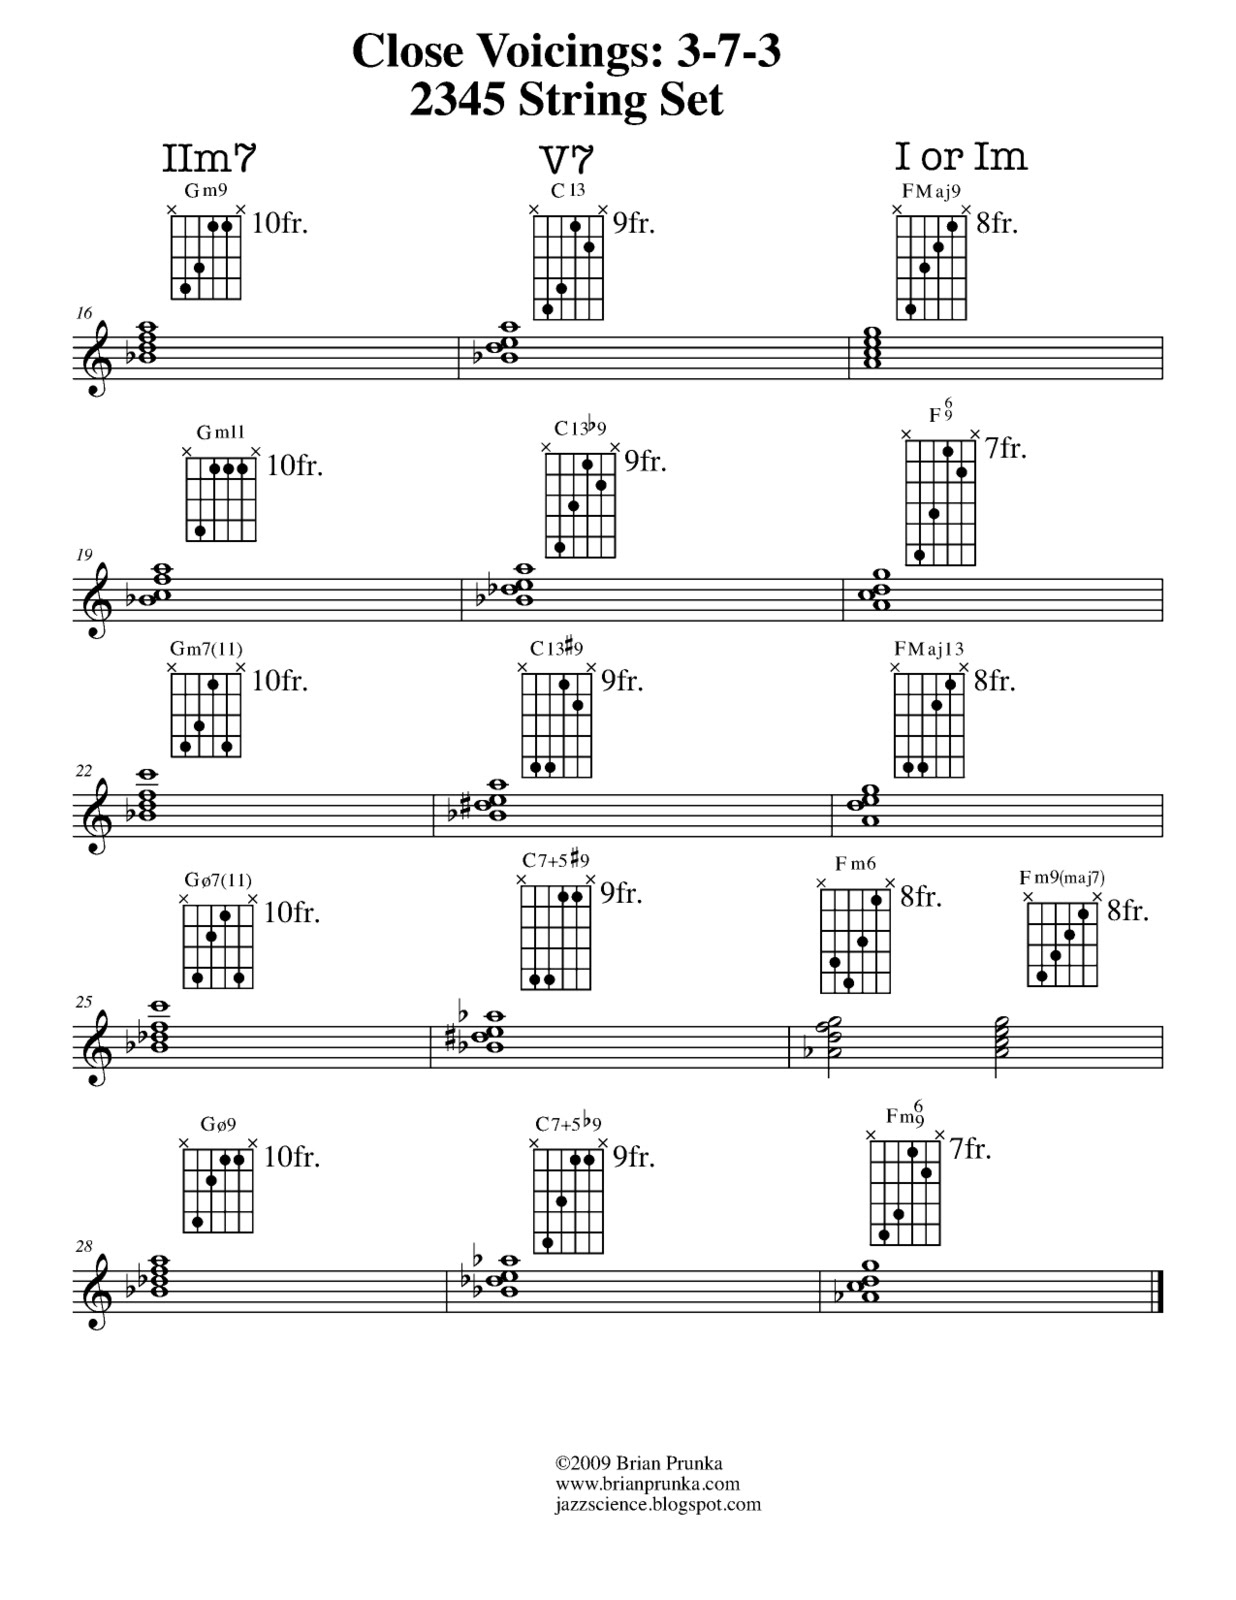 Rootless close chord voicings for jazz guitar - Bill Evans style